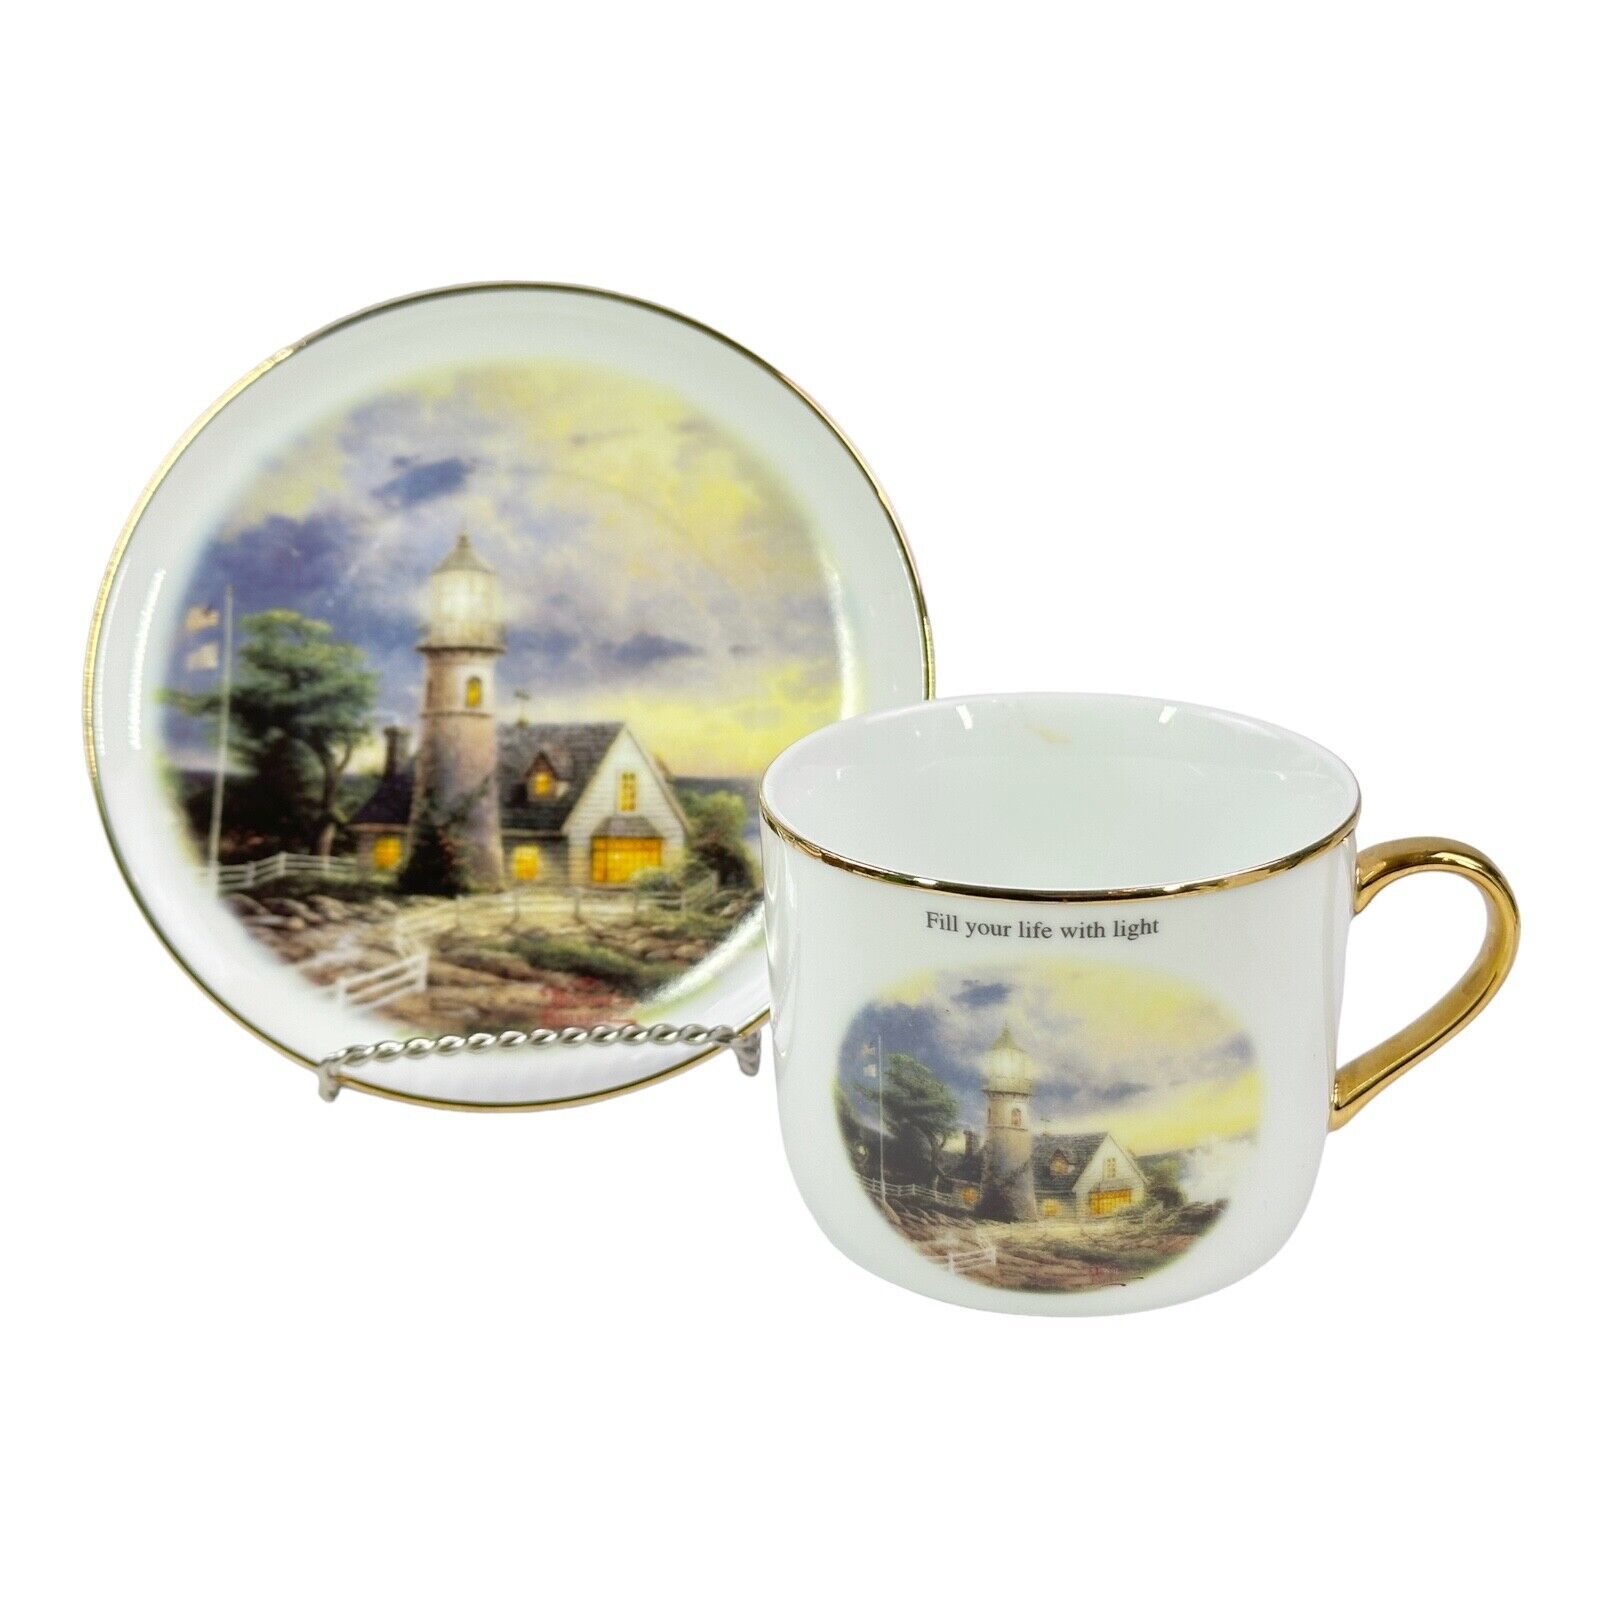 Primary image for Thomas Kinkade A Light In The Storm Cup Saucer Set Teleflora Porcelain 2003 EUC